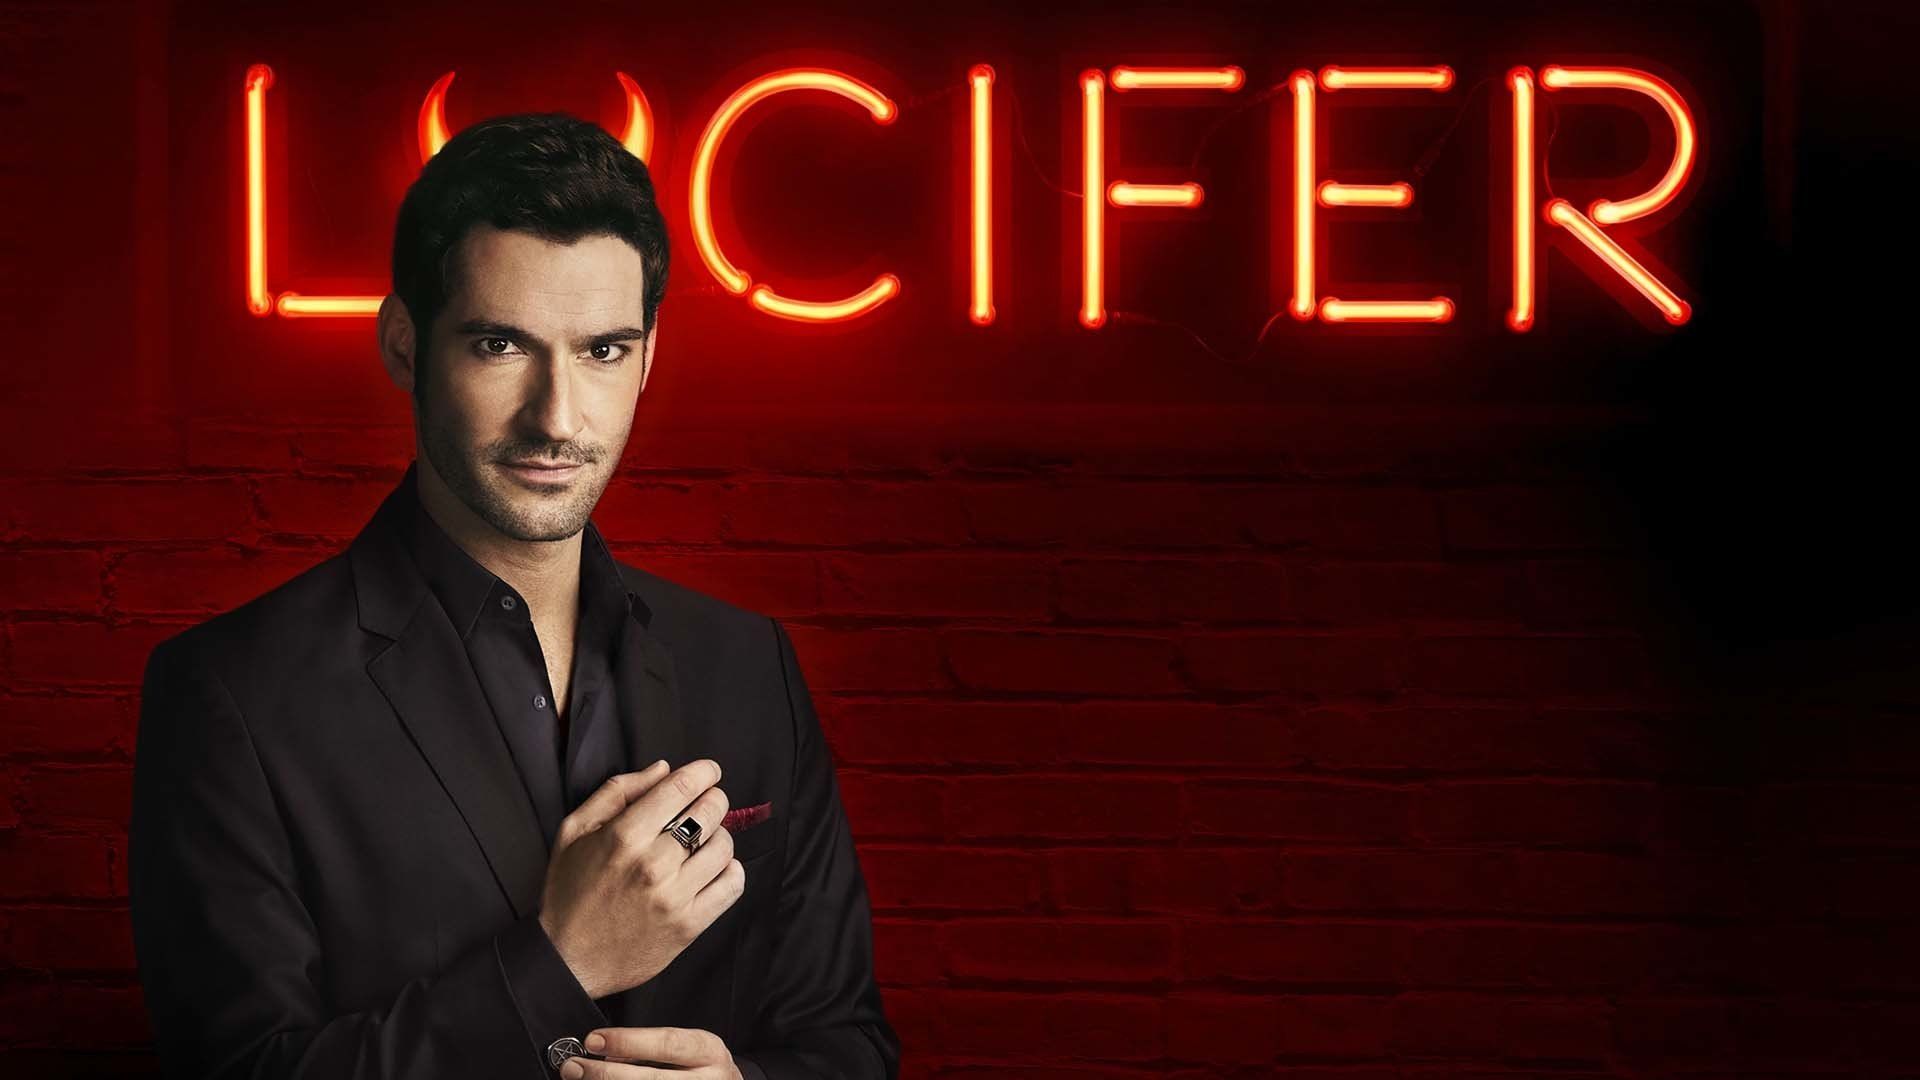 Lucifer Season 5 Trailer and Release Date